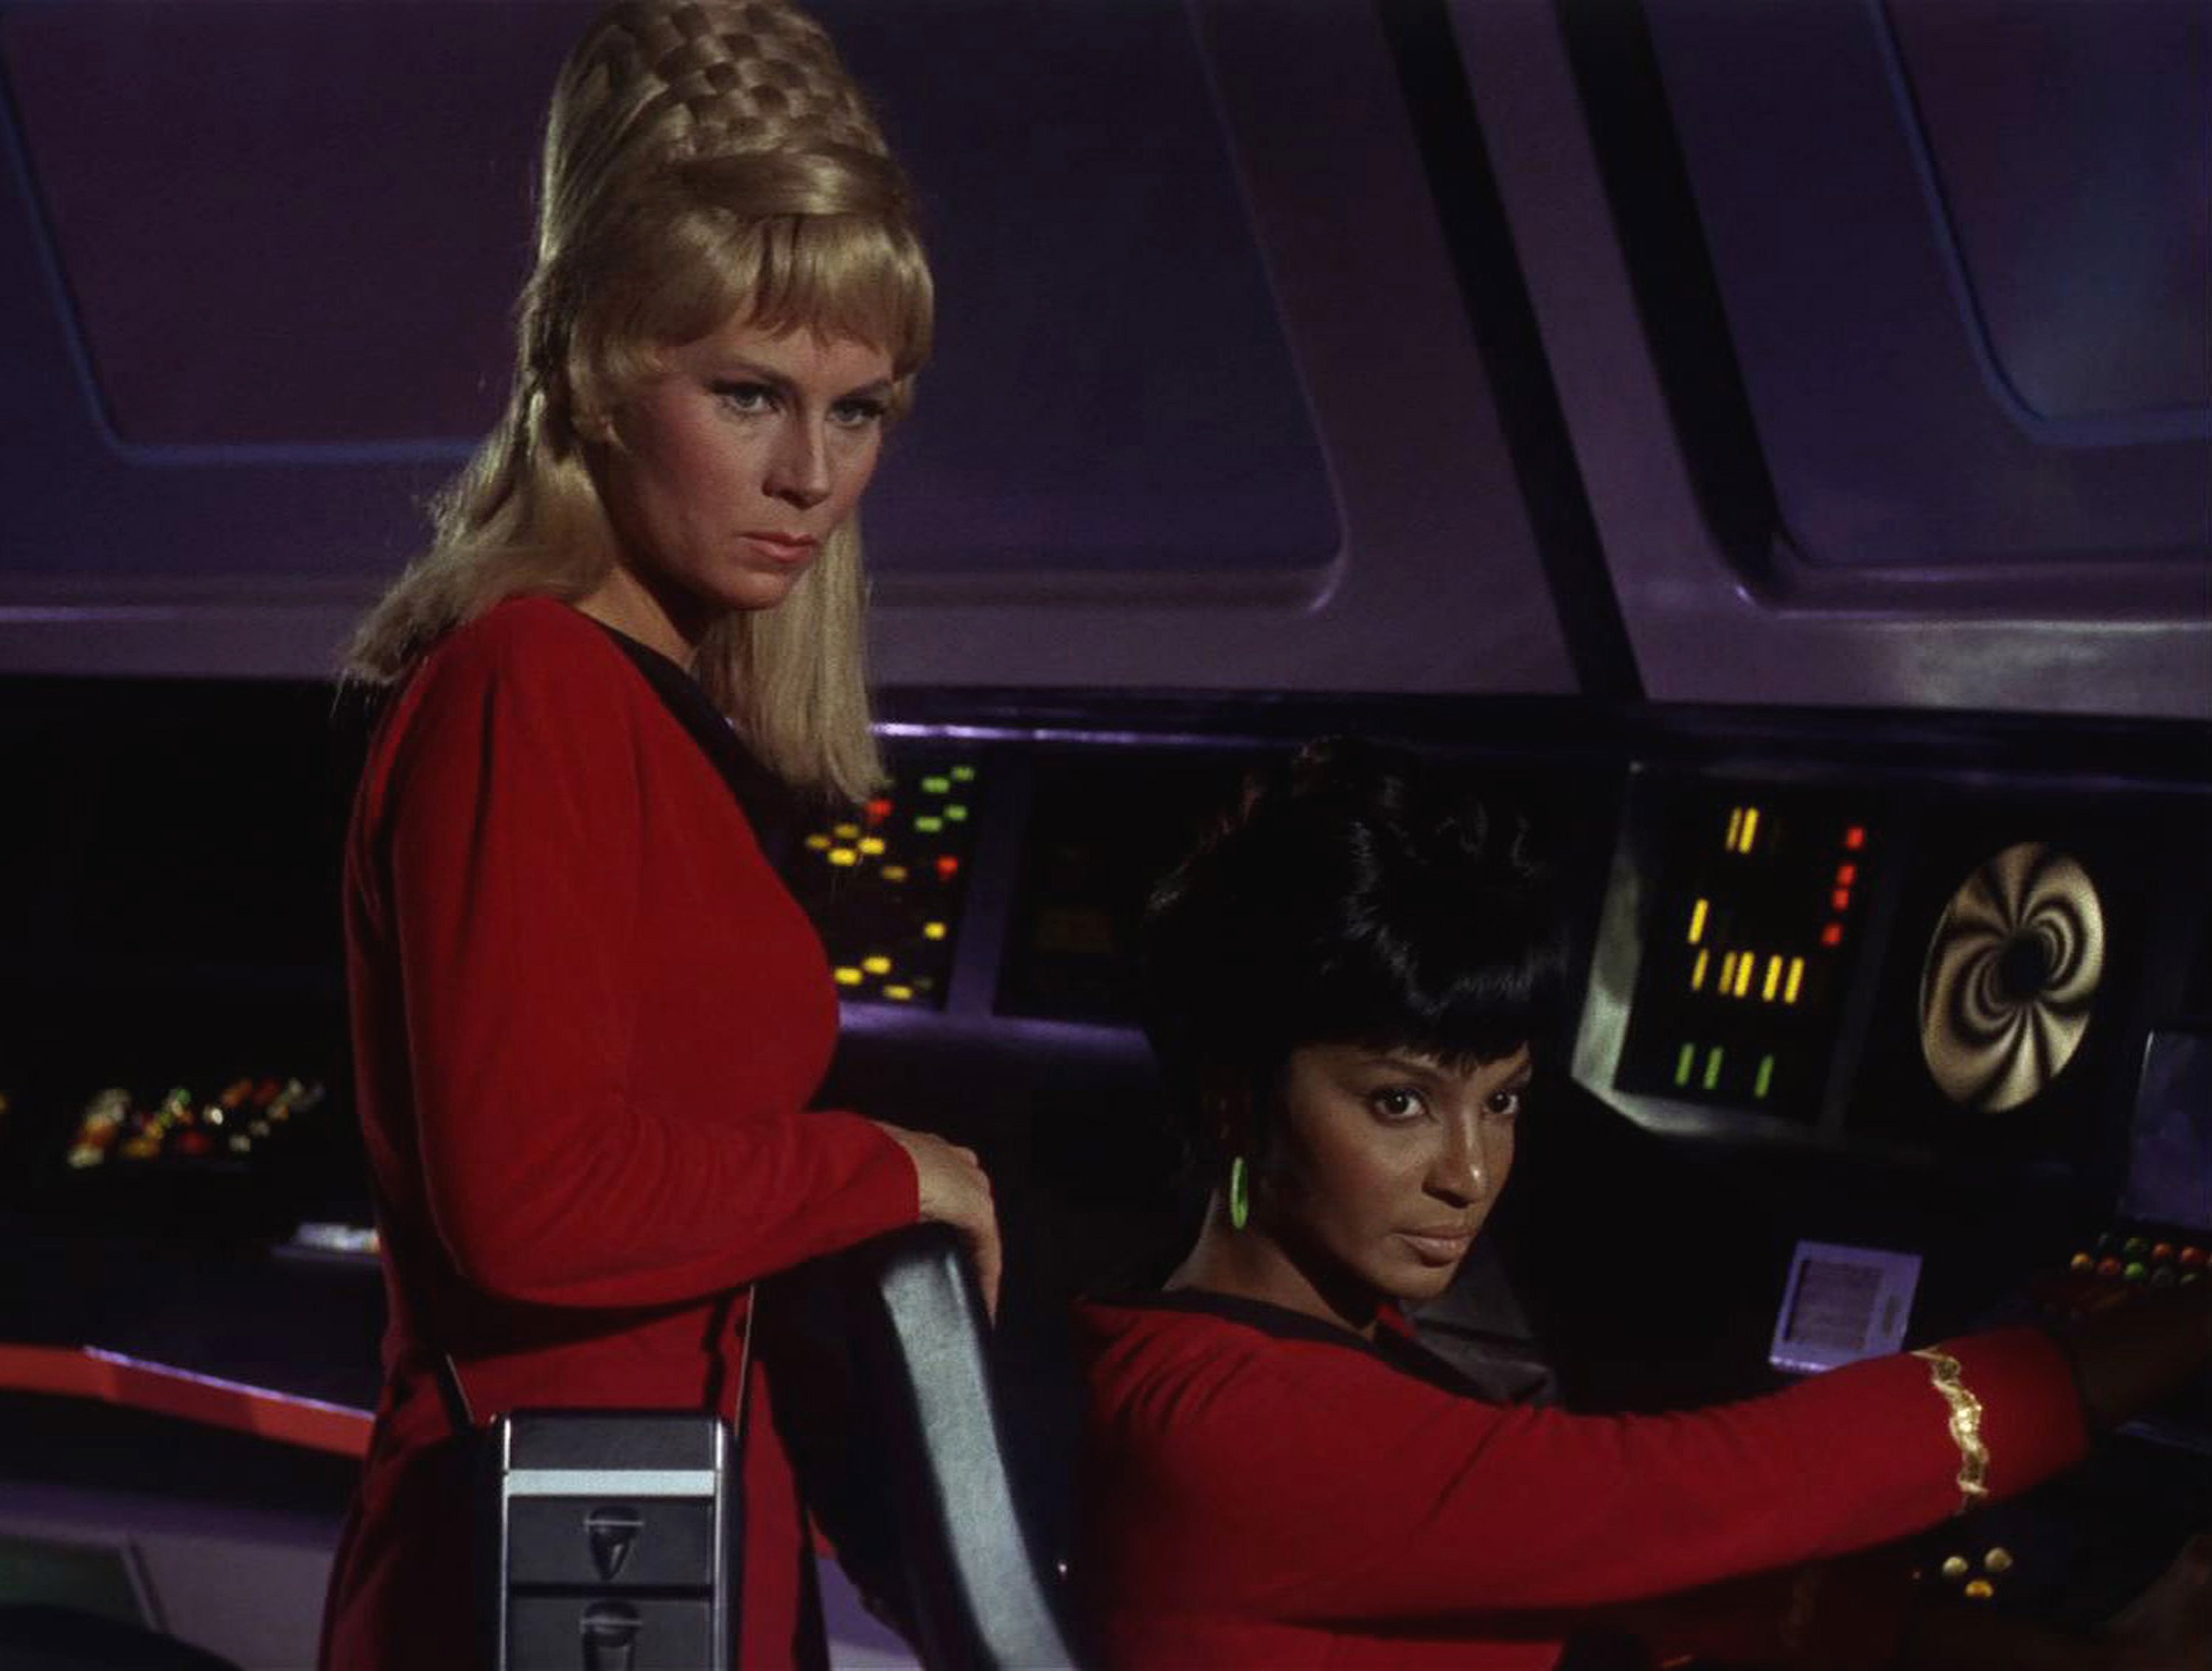 Grace Lee Whitney, as Yeoman Janice Rand, and Nichelle Nichols, as Lieutenant Uhura, on the premiere episode of "Star Trek," on September 8, 1966. | Source: Getty Images